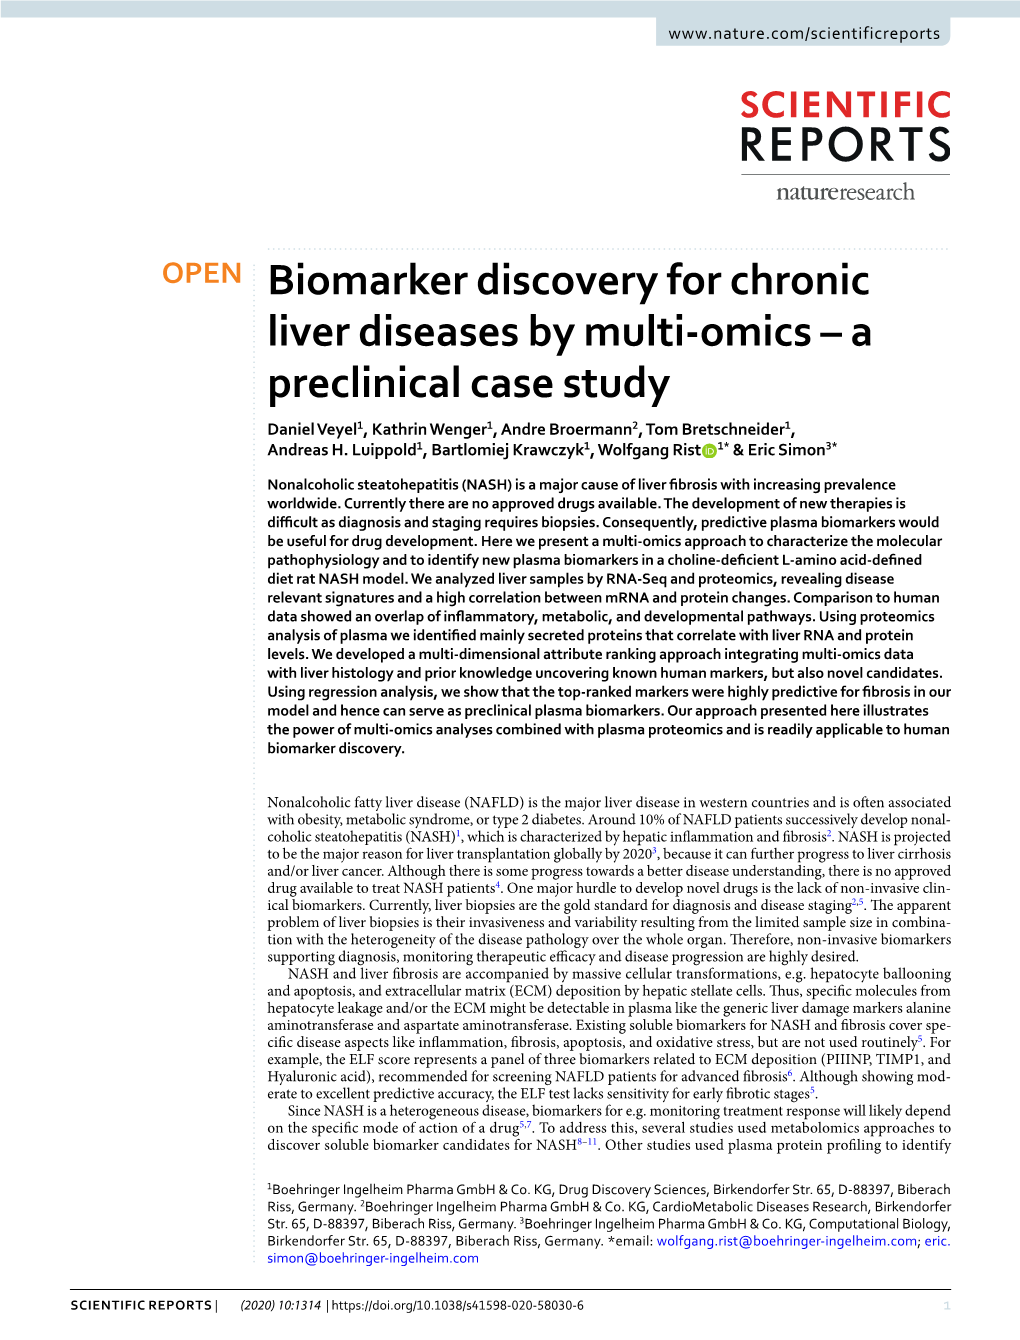 Biomarker Discovery for Chronic Liver Diseases by Multi-Omics